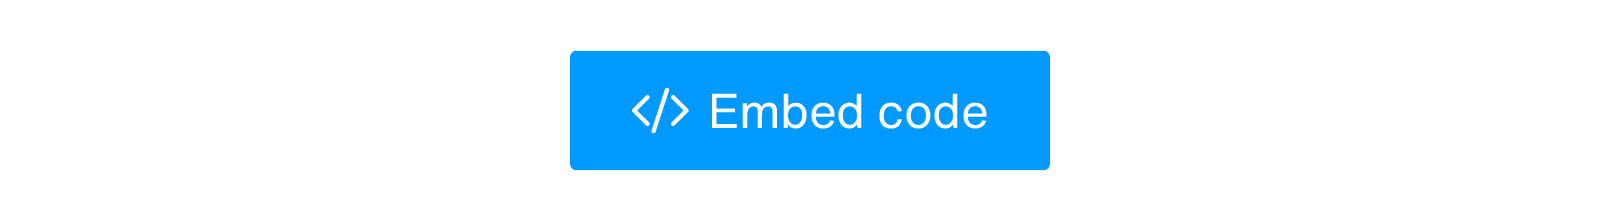 Embed code_01